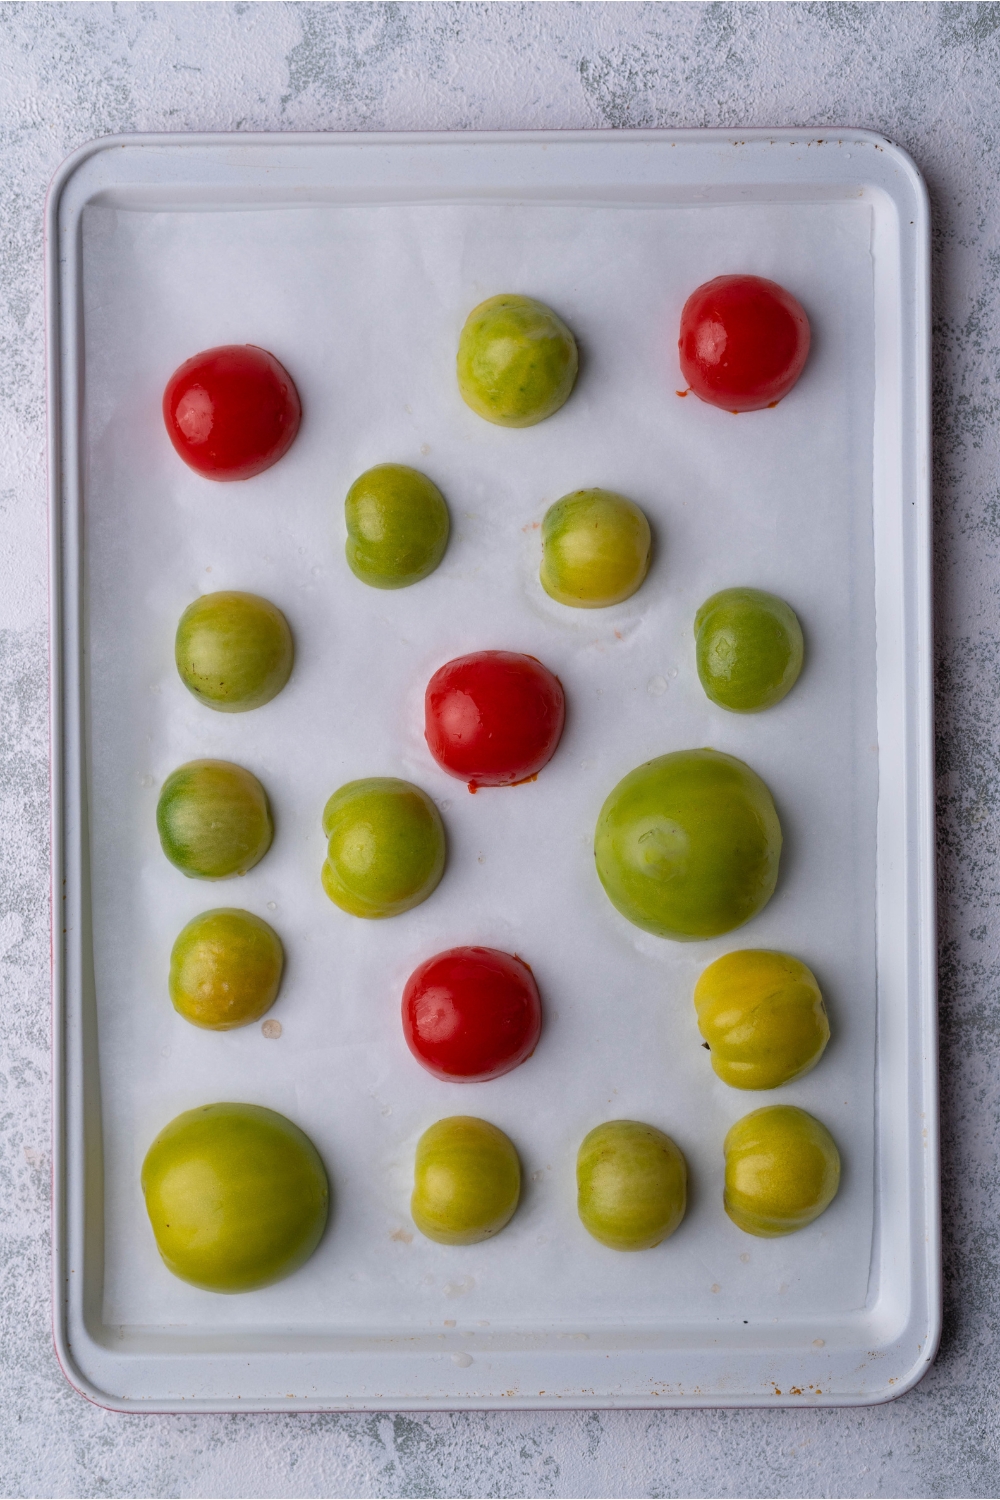 Halved tomatillos, green tomatoes, and cherry tomatoes face-down on a baking sheet lined with parchment paper.